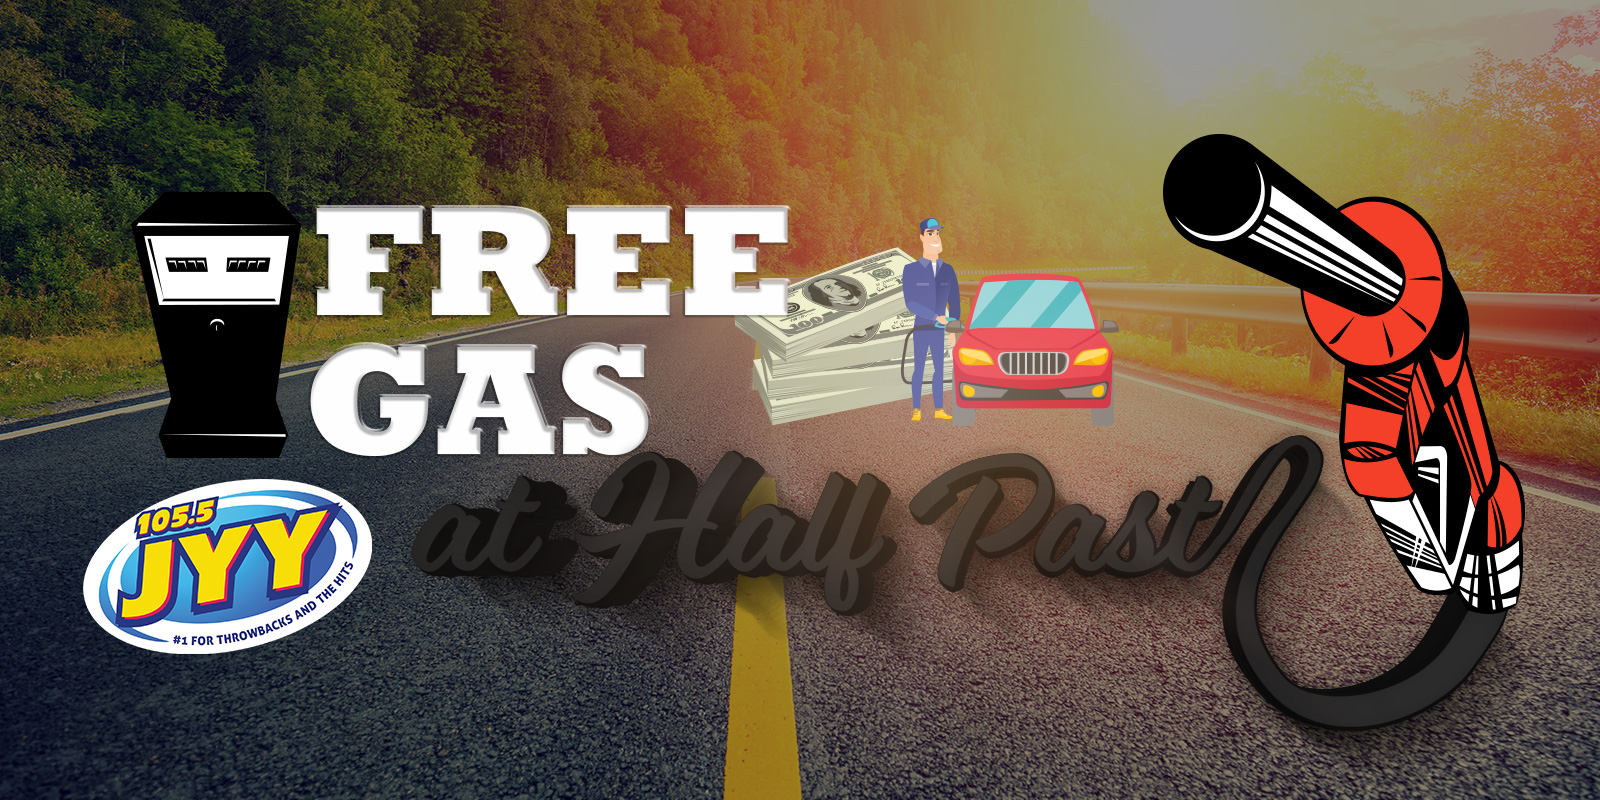 Free Gas at Half Past! Listen For the Keyword and Enter For a Chance to Win